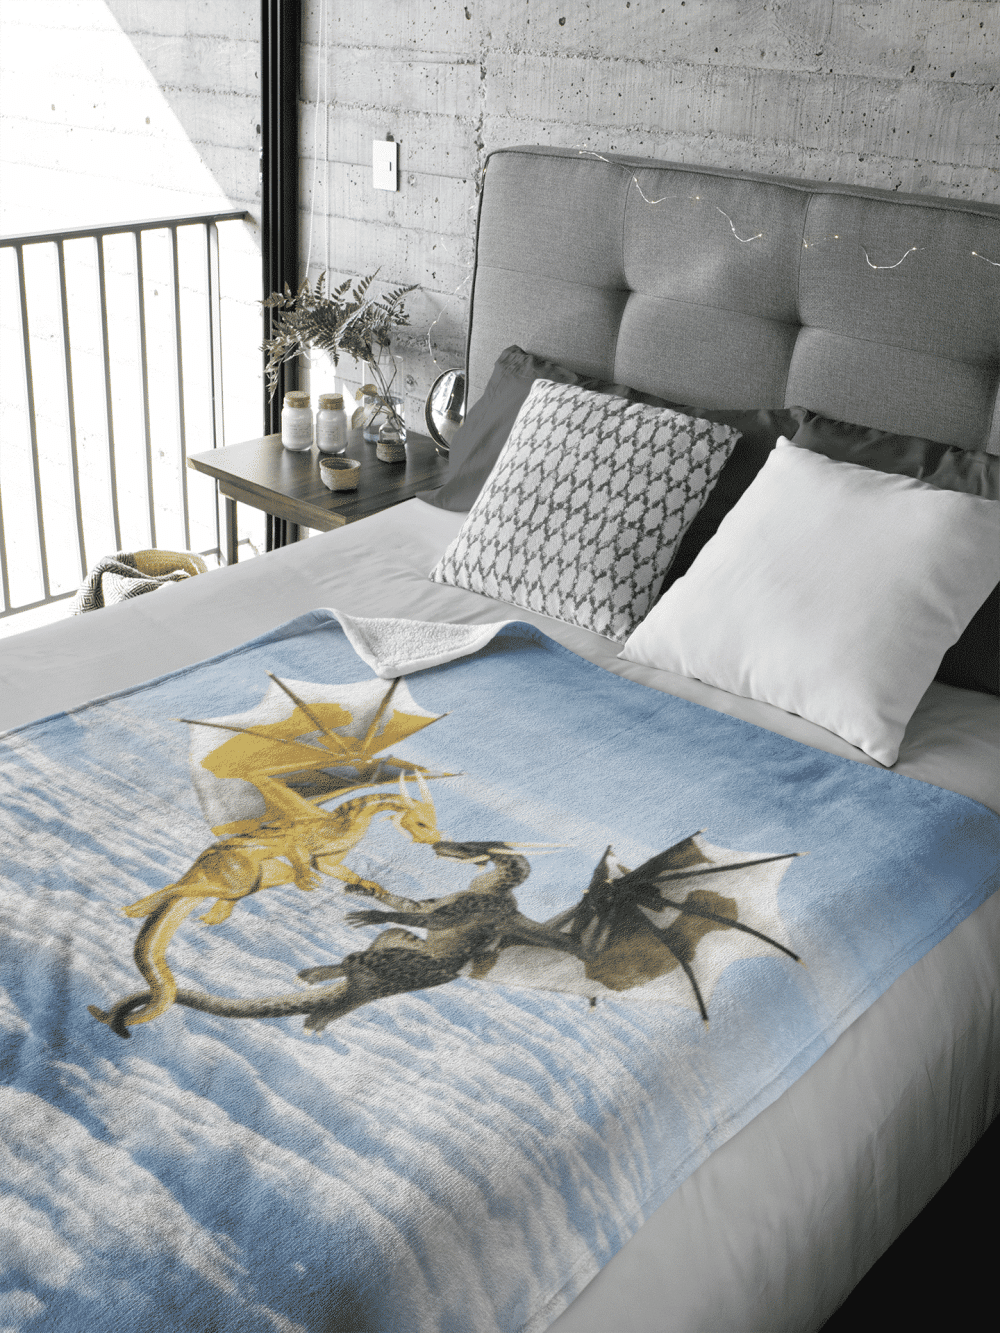 Dragon Lovers Above the Clouds Fleece Throw Blanket